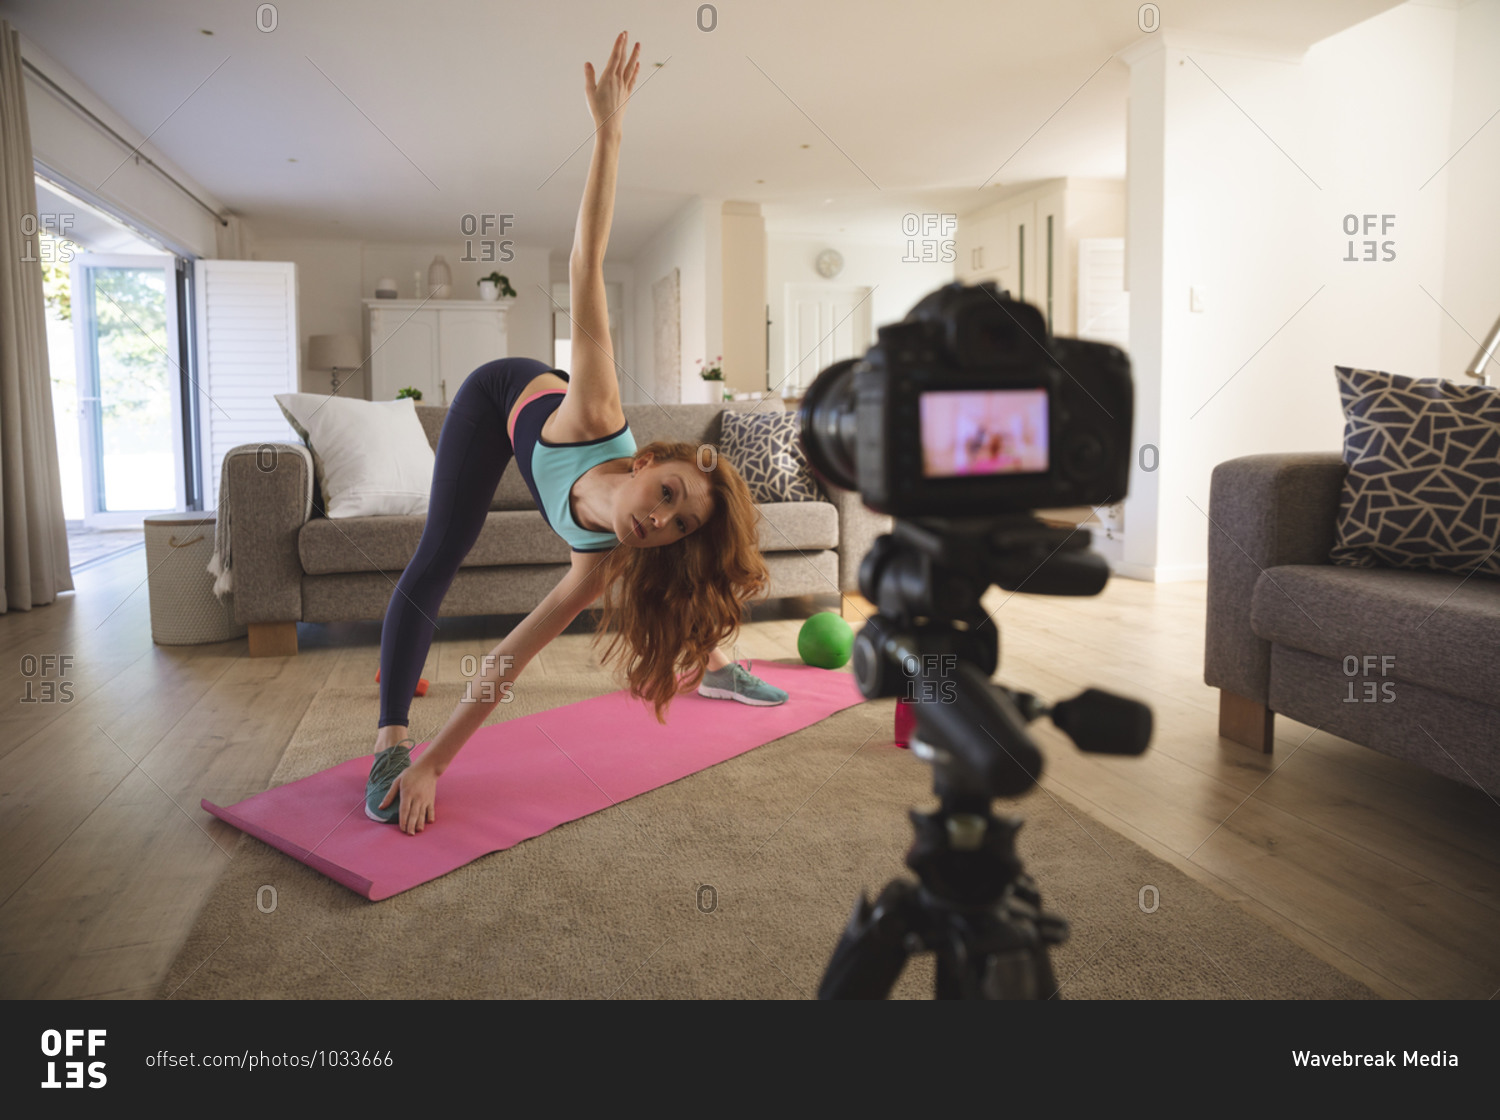 Caucasian woman spending time at home, in living room, exercising and recording it with a camera. Social distancing during Covid 19 Coronavirus quarantine lockdown.